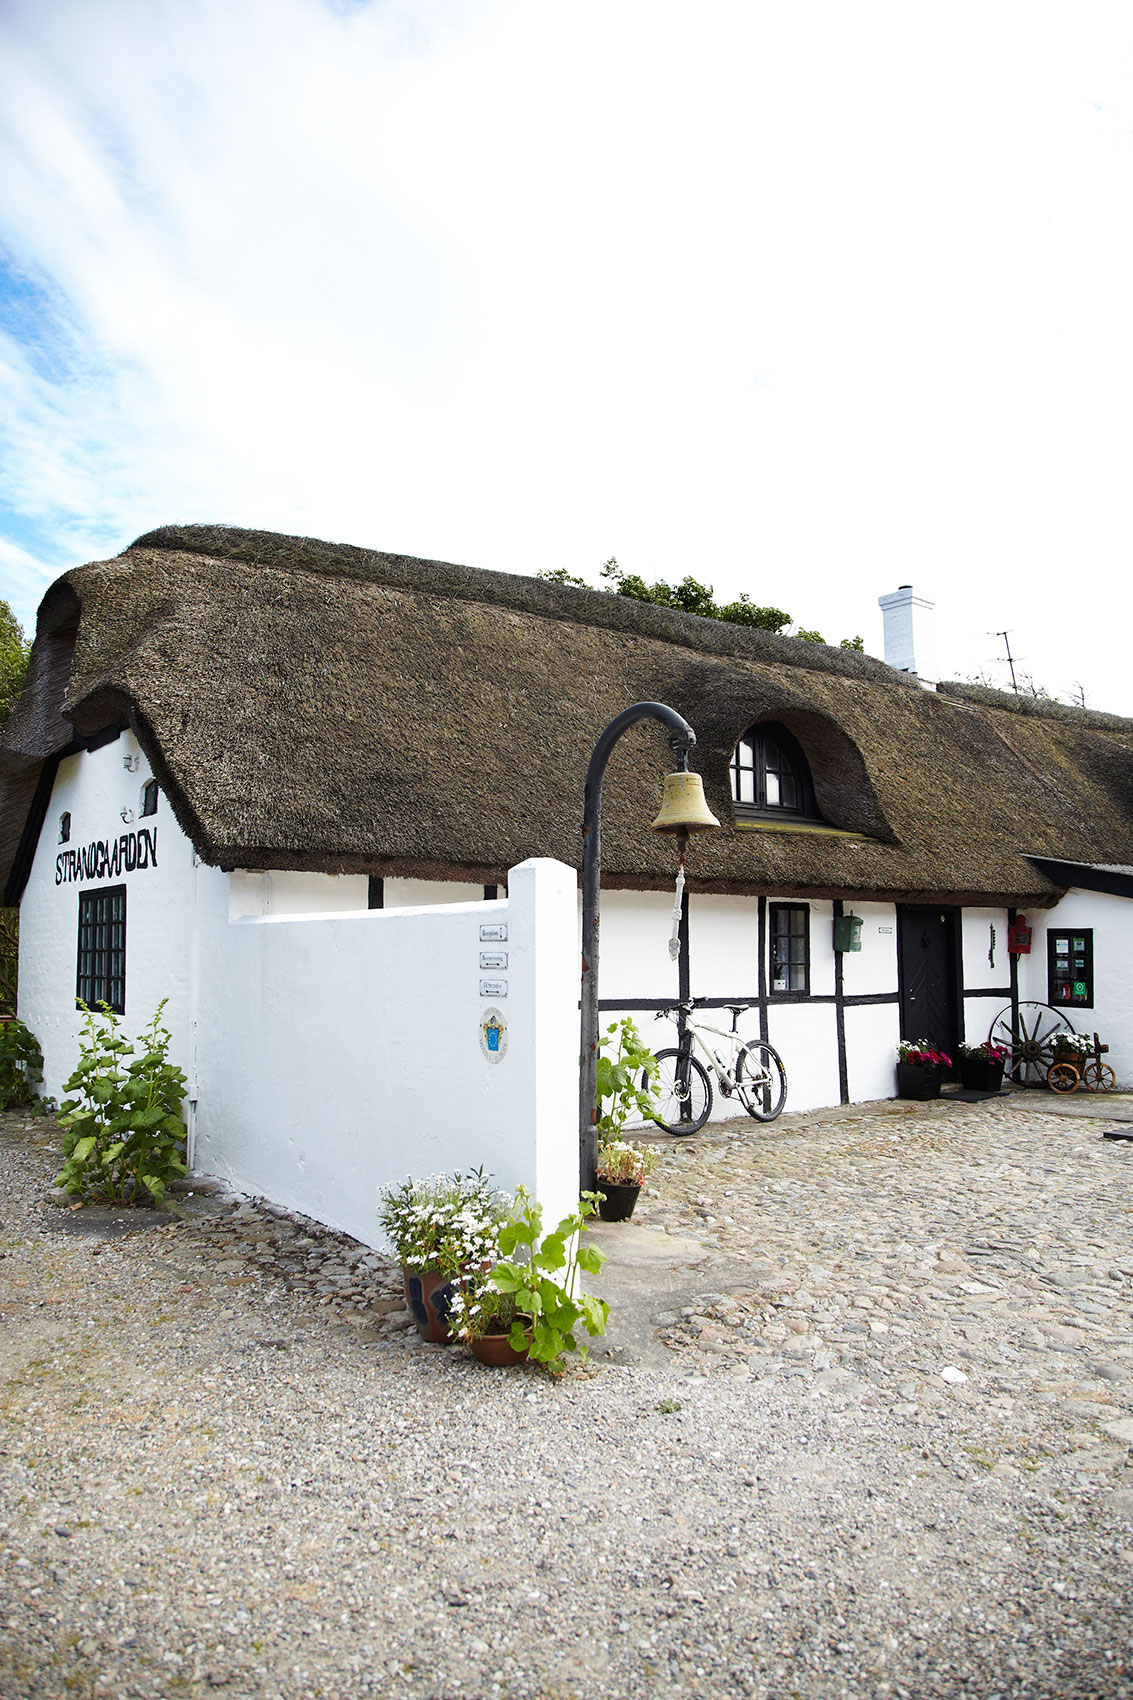 Laesoe Salt • Traditional Danish Hotel with Thatched Roof & Painted White Brick • Advertising & Lifestyle Food Photography